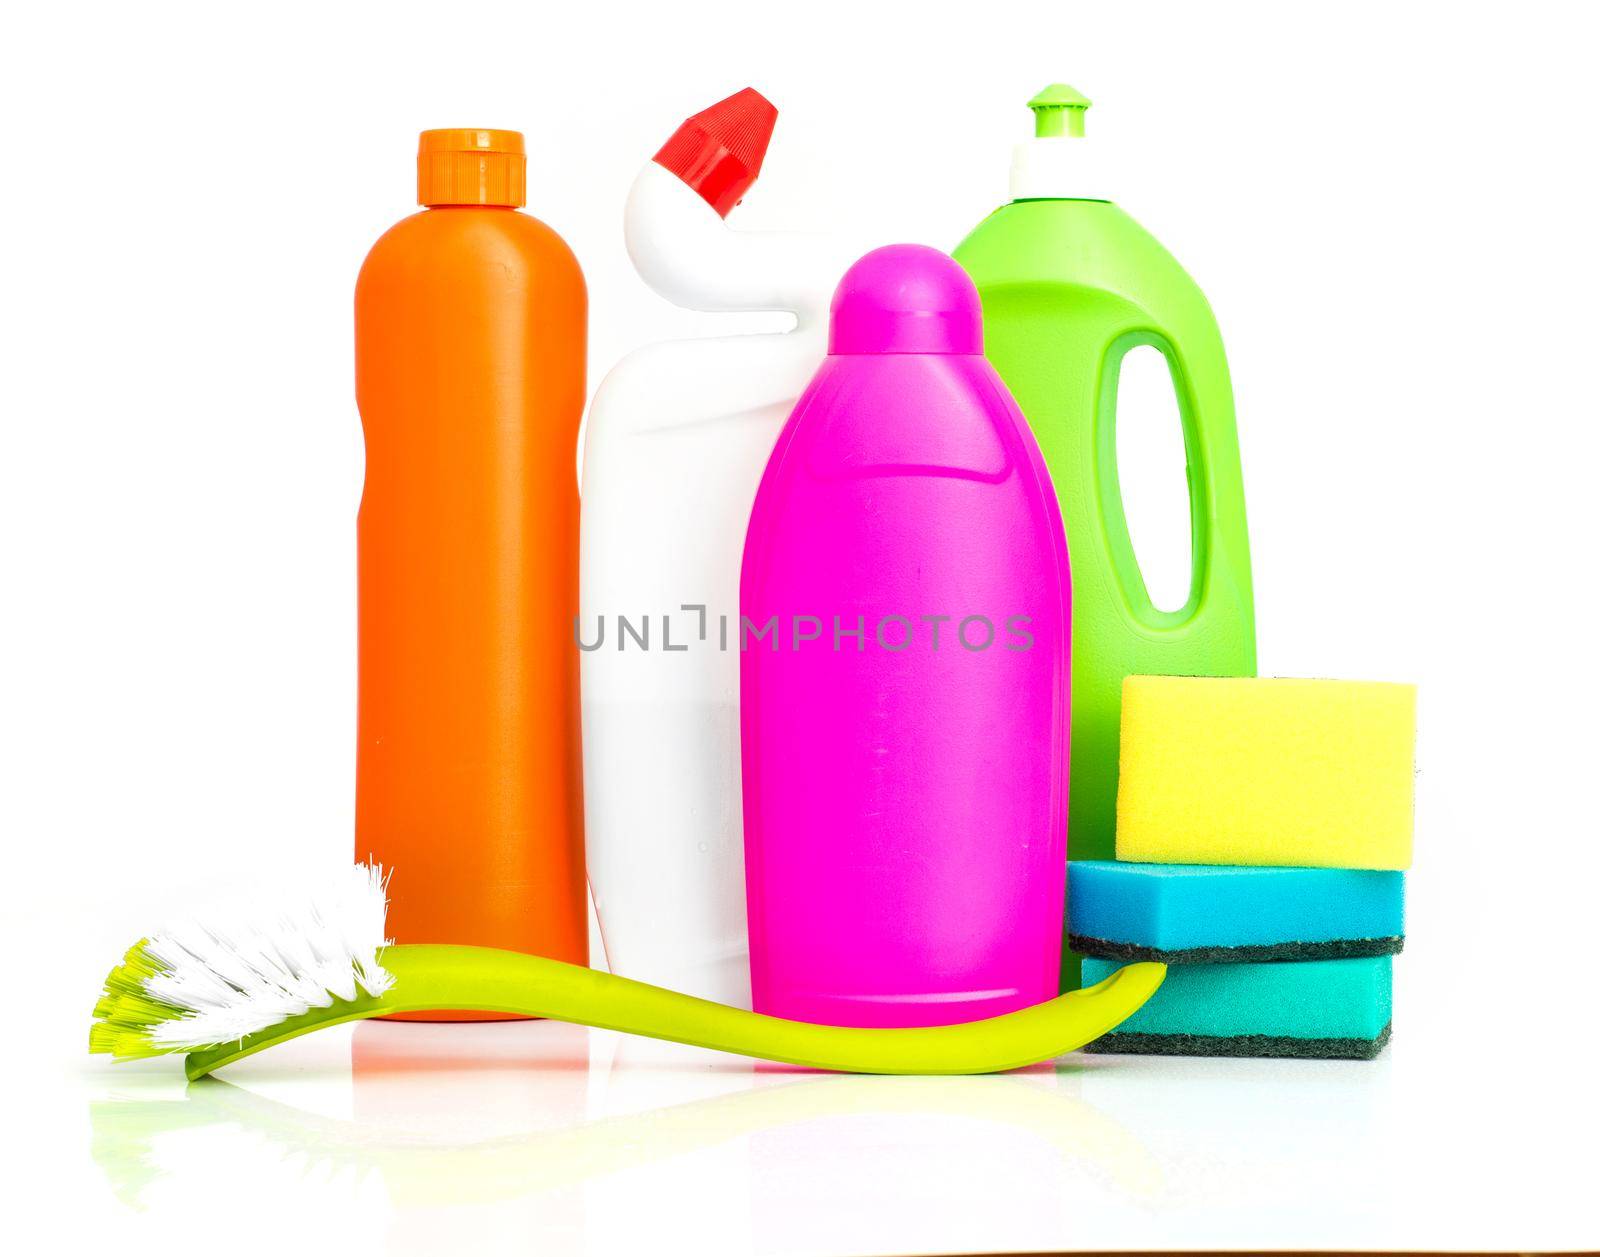 cleaning supplies and gloves isolated on white background by tan4ikk1